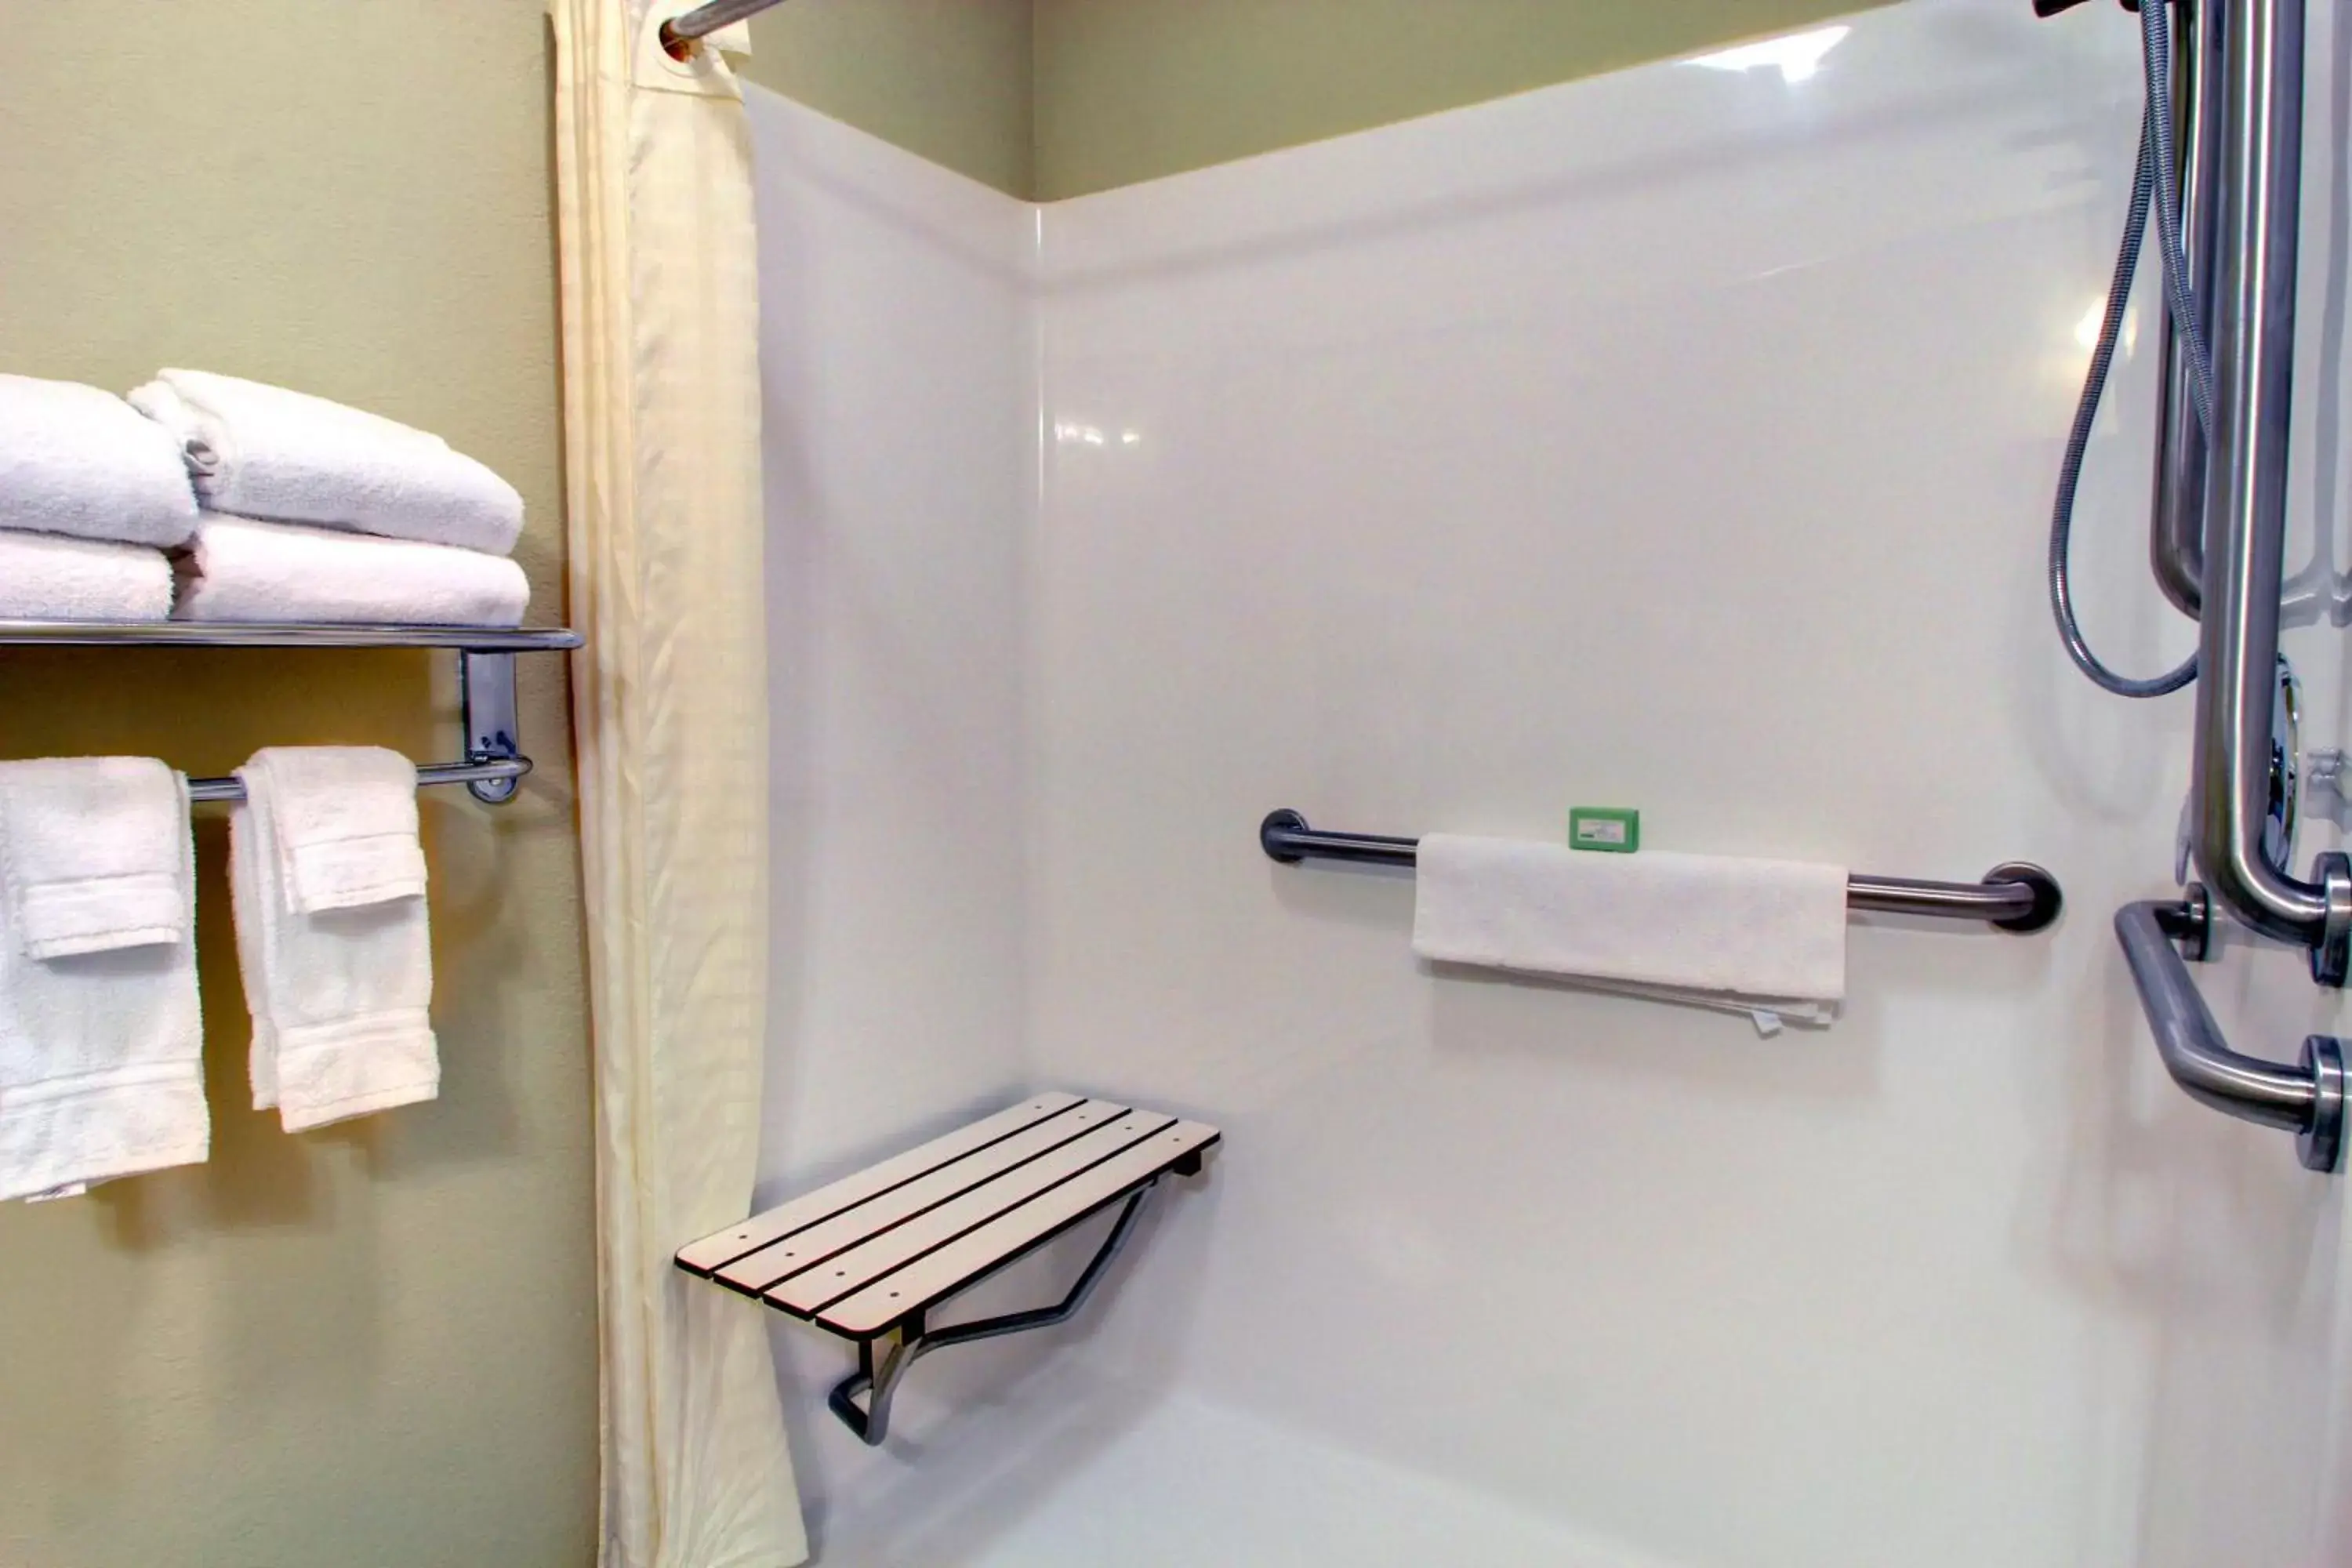 Facility for disabled guests, Bathroom in Cobblestone Inn & Suites - Carrington